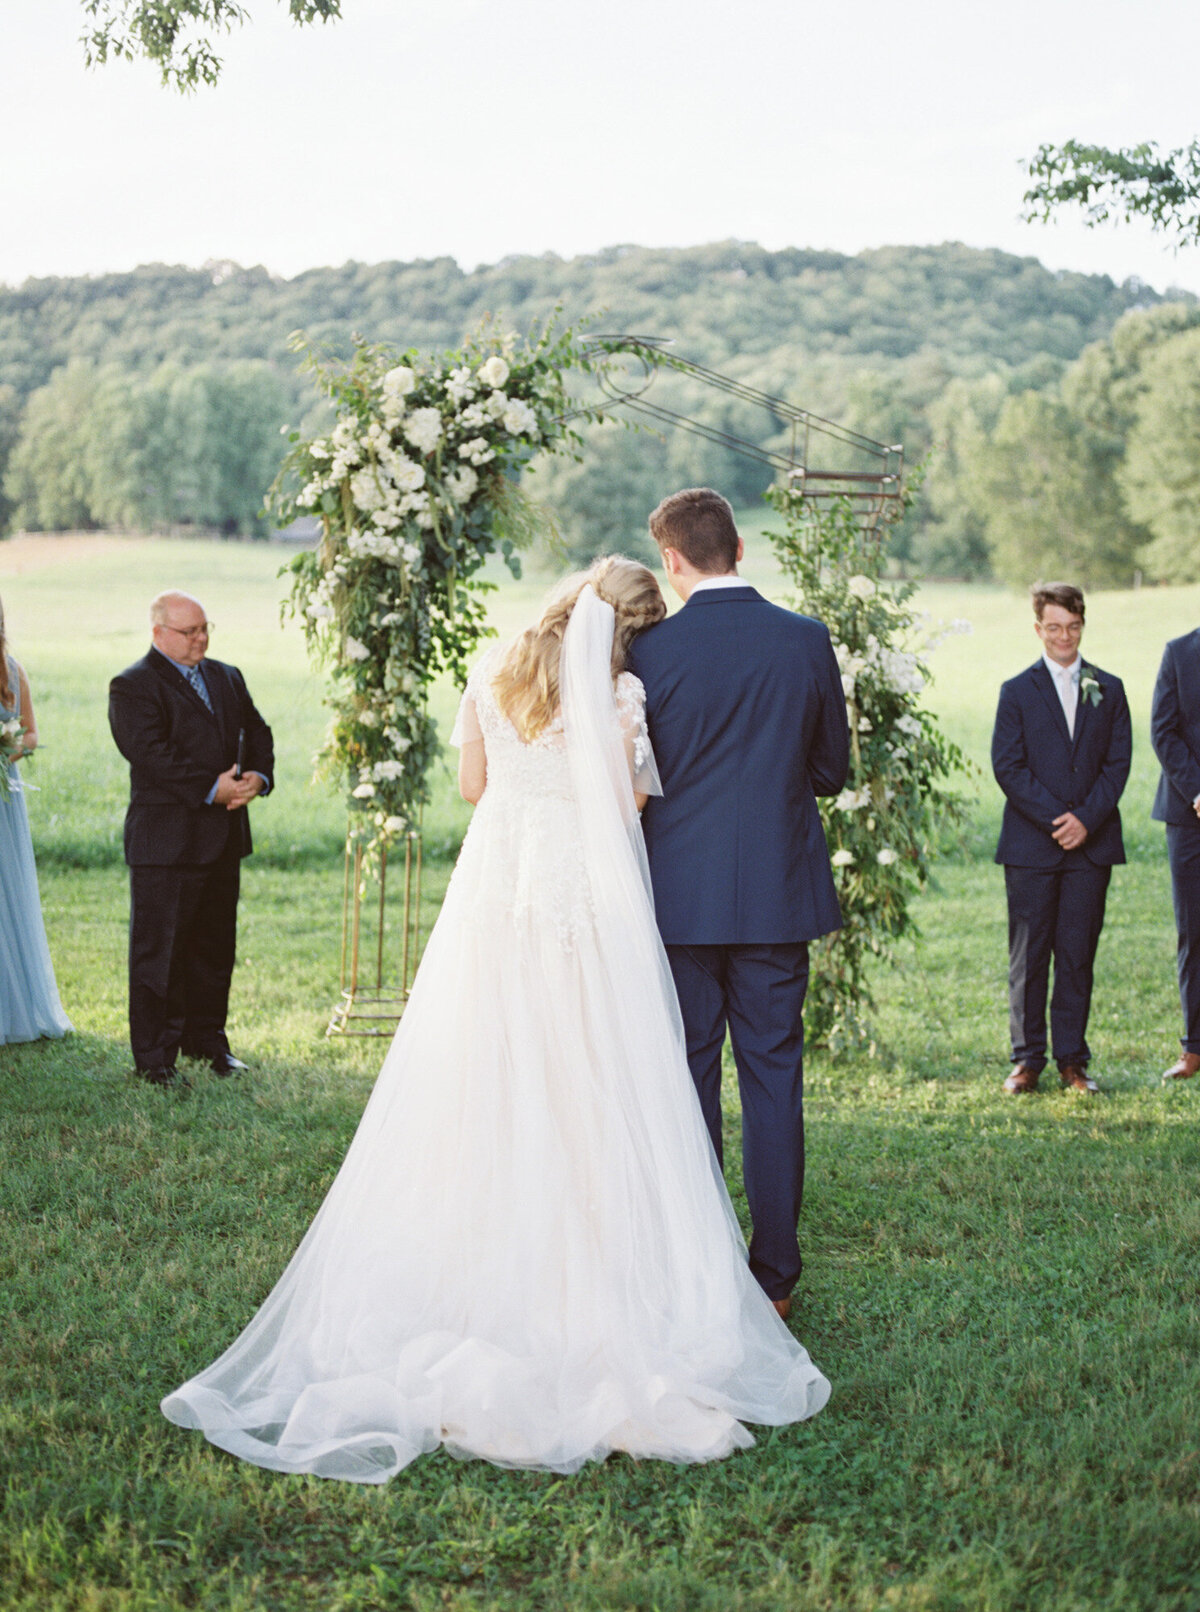 A bride lays her head over on her groom's shoulder during a ceremony at Sweet Seasons Farm by Chattanooga wedding photographer, Kelsey Dawn Photography